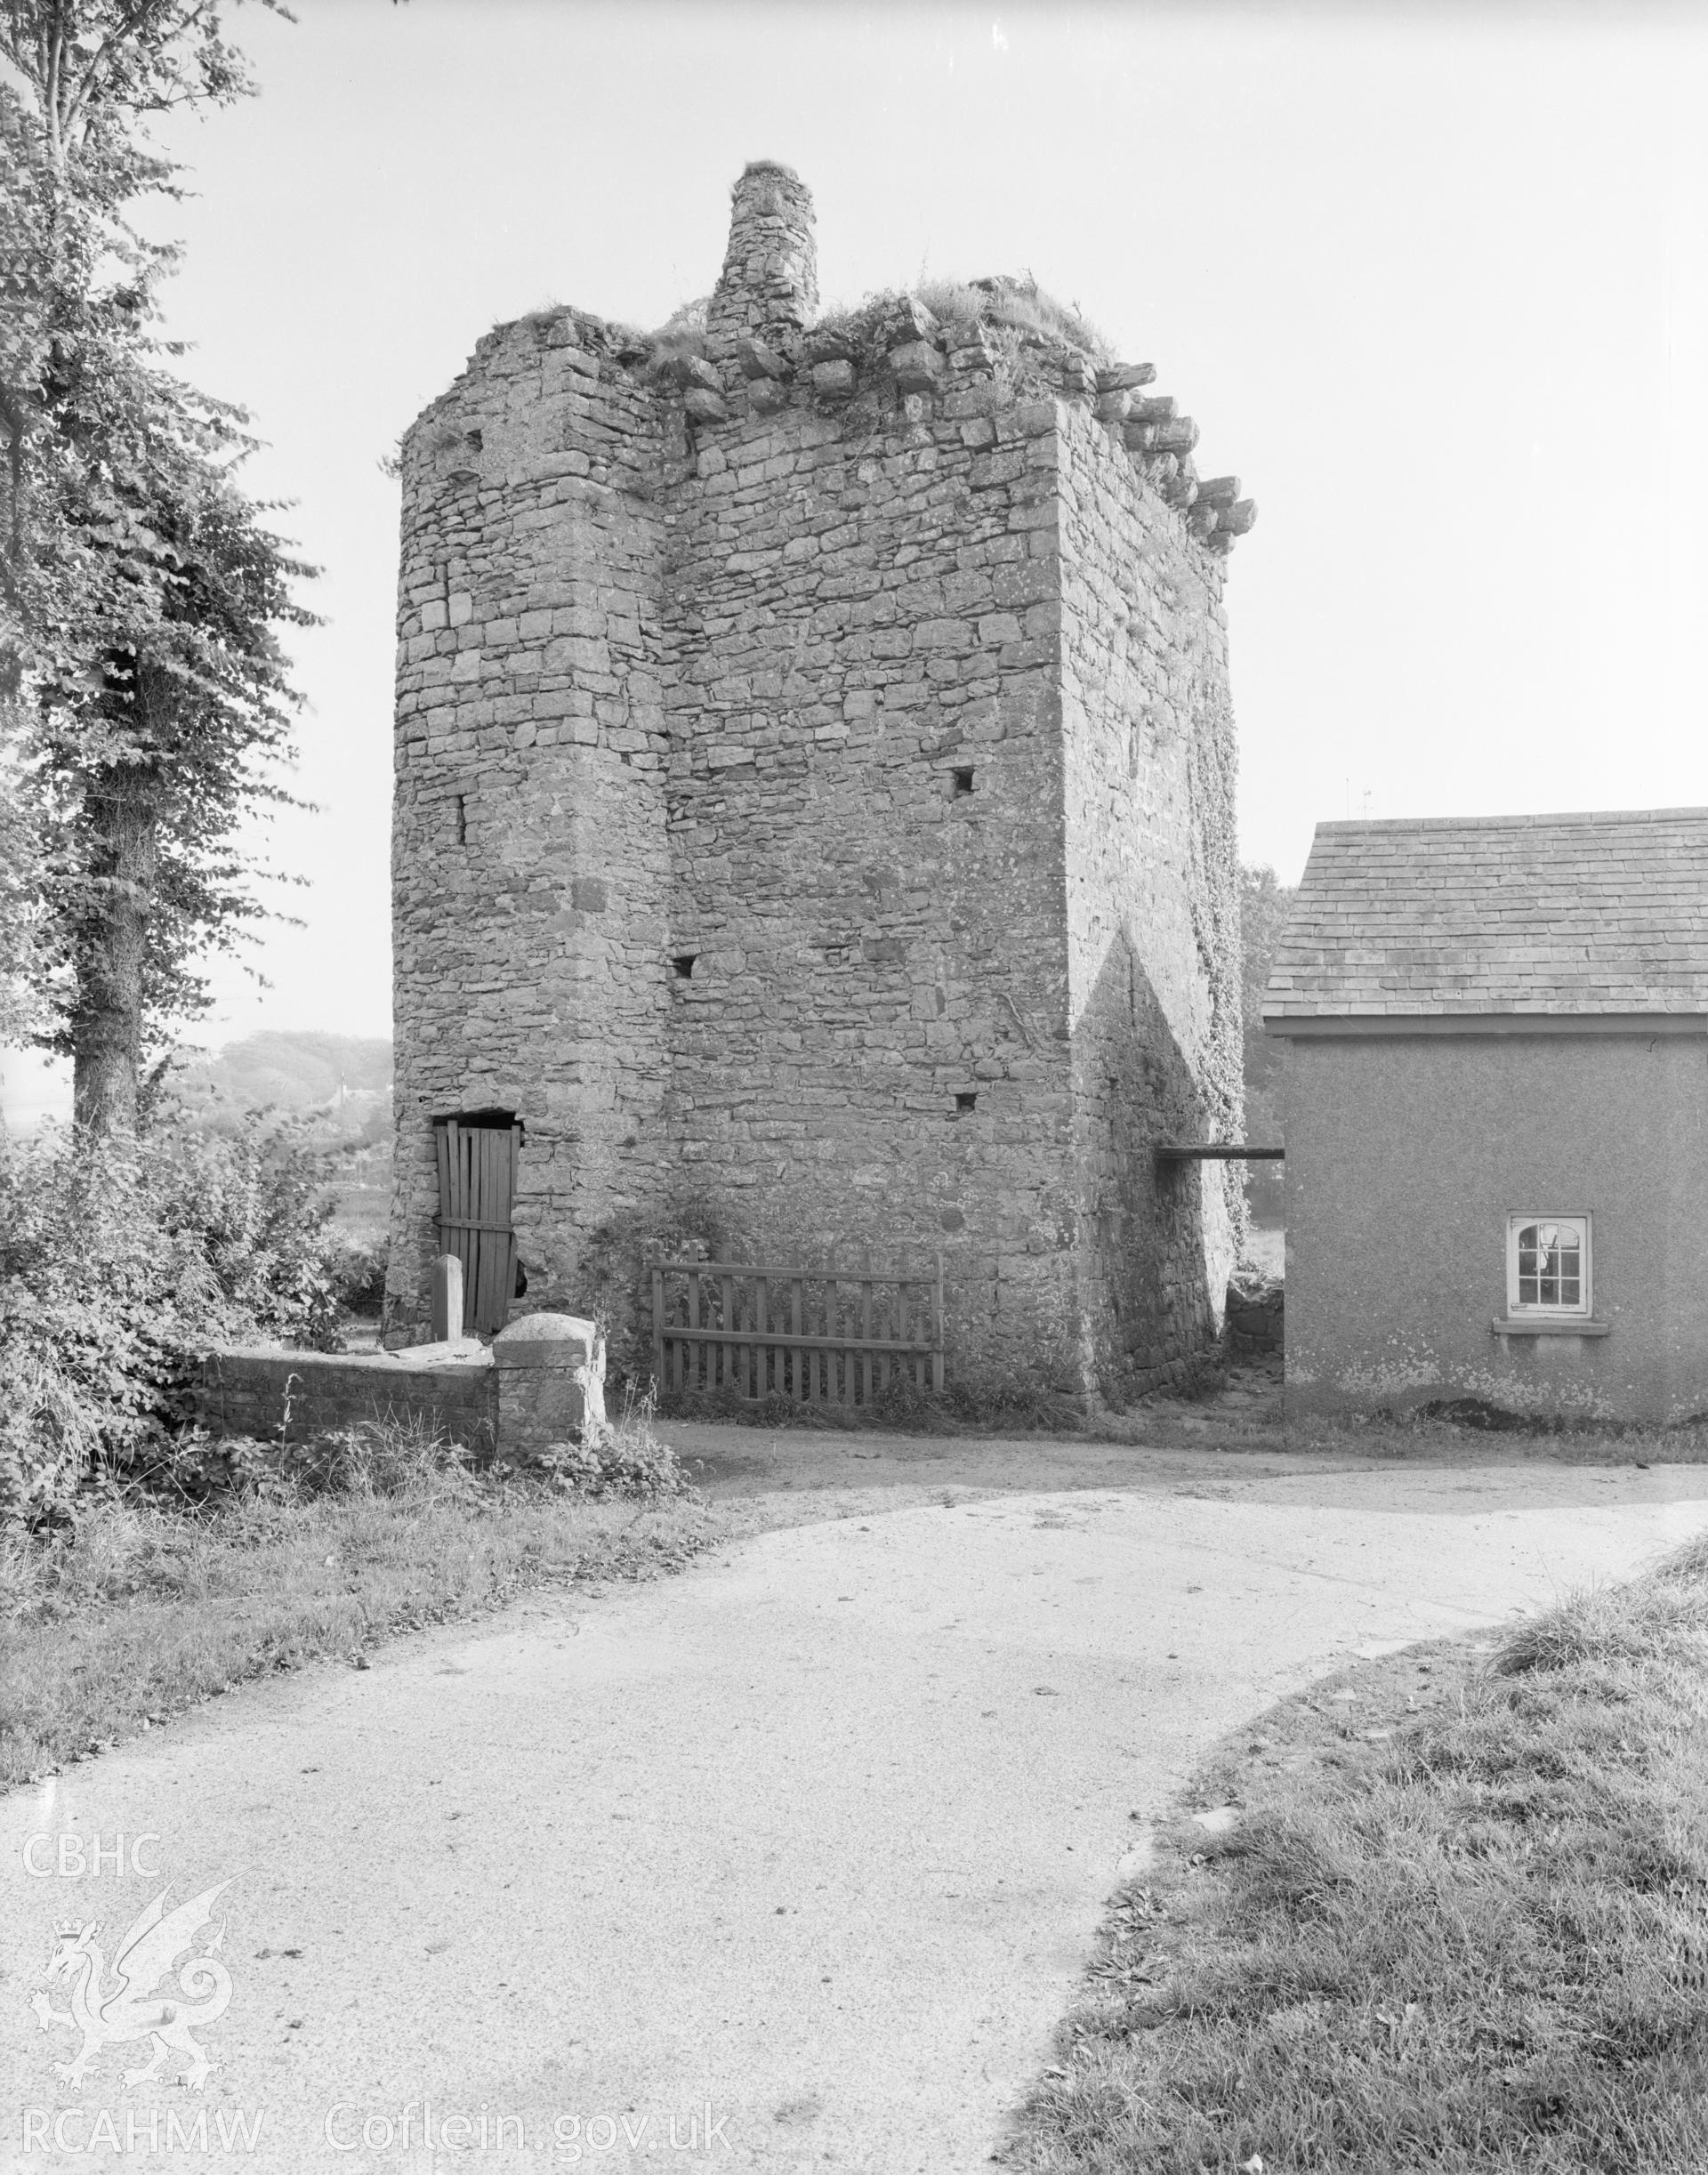 Digital copy of a view of the Old Rectory, Pele Tower.